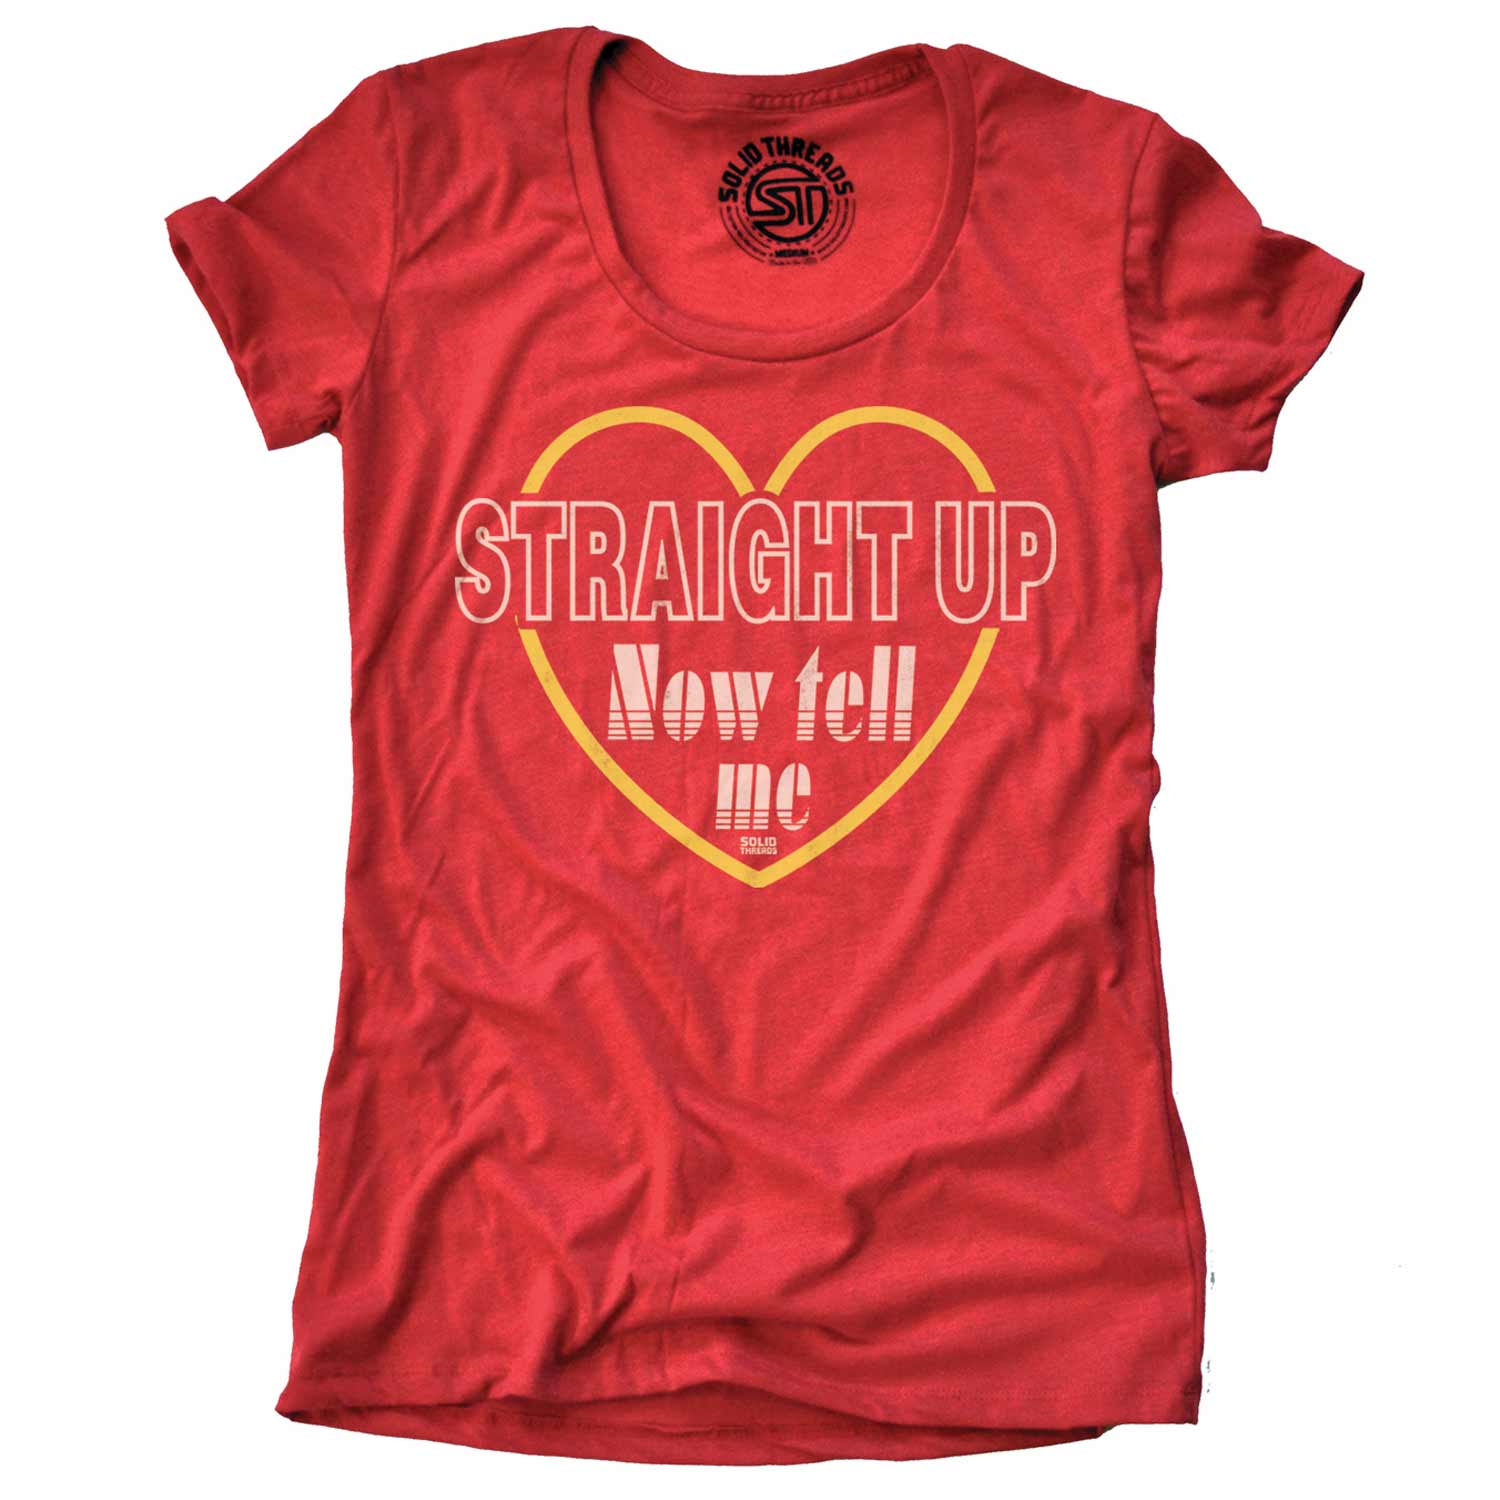 Women's Straight Up Now Tell Me Cool Graphic T-Shirt | Vintage 80s Paul Abdul Tee | Solid Threads